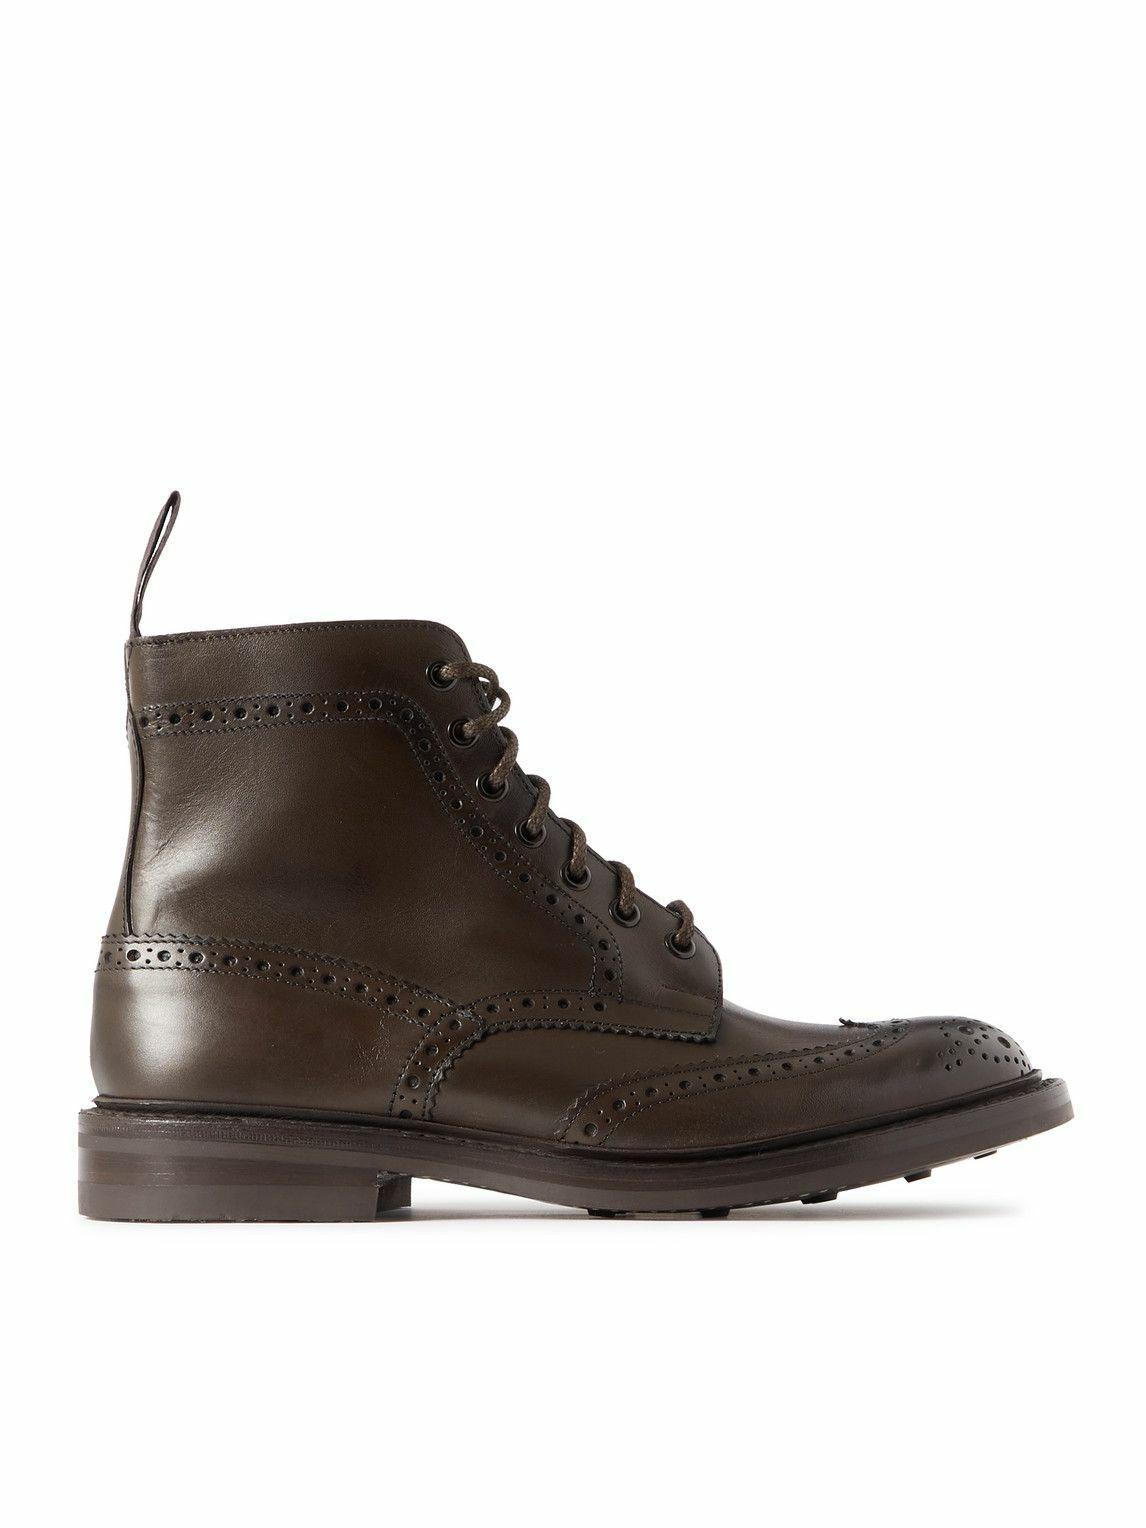 Photo: Tricker's - Stow Leather Brogue Boots - Brown